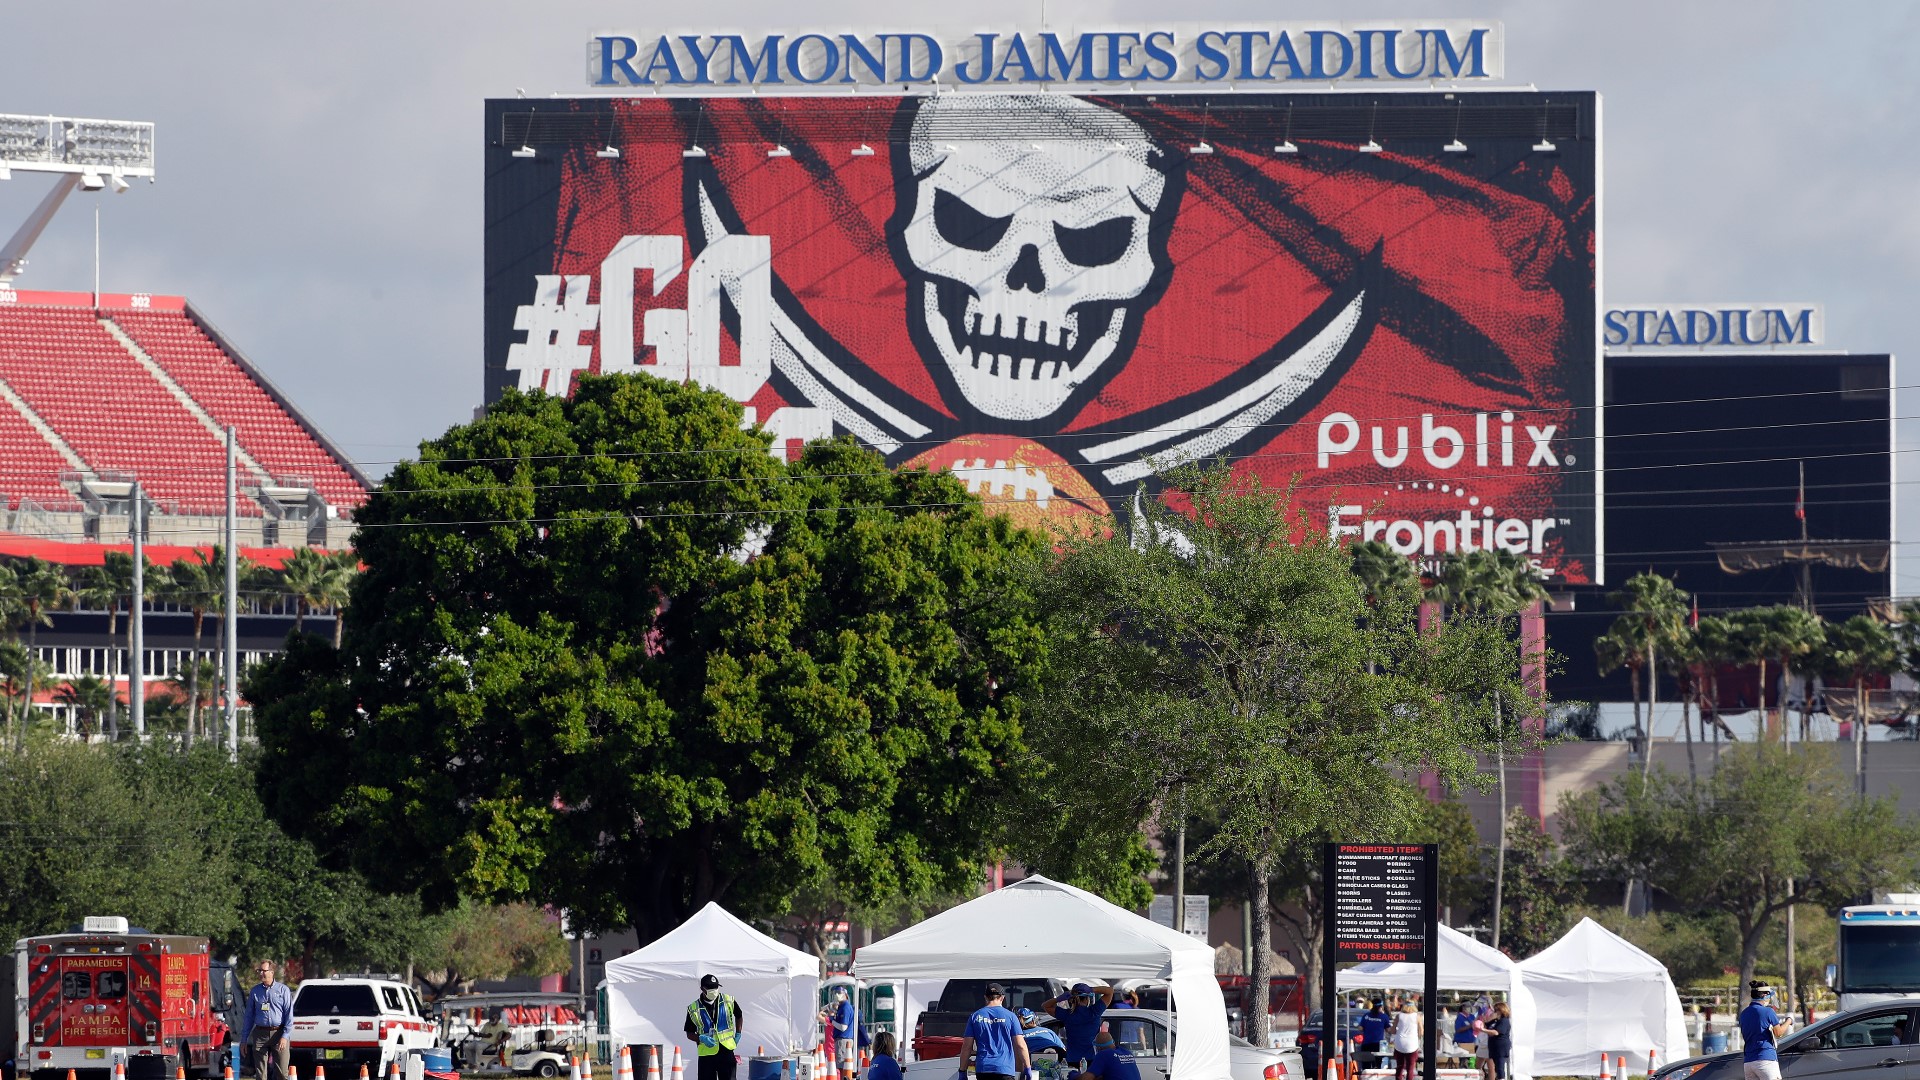 With the global pandemic top of mind, Tampa Sports Authority is putting safety first for its employees and sporting fans.